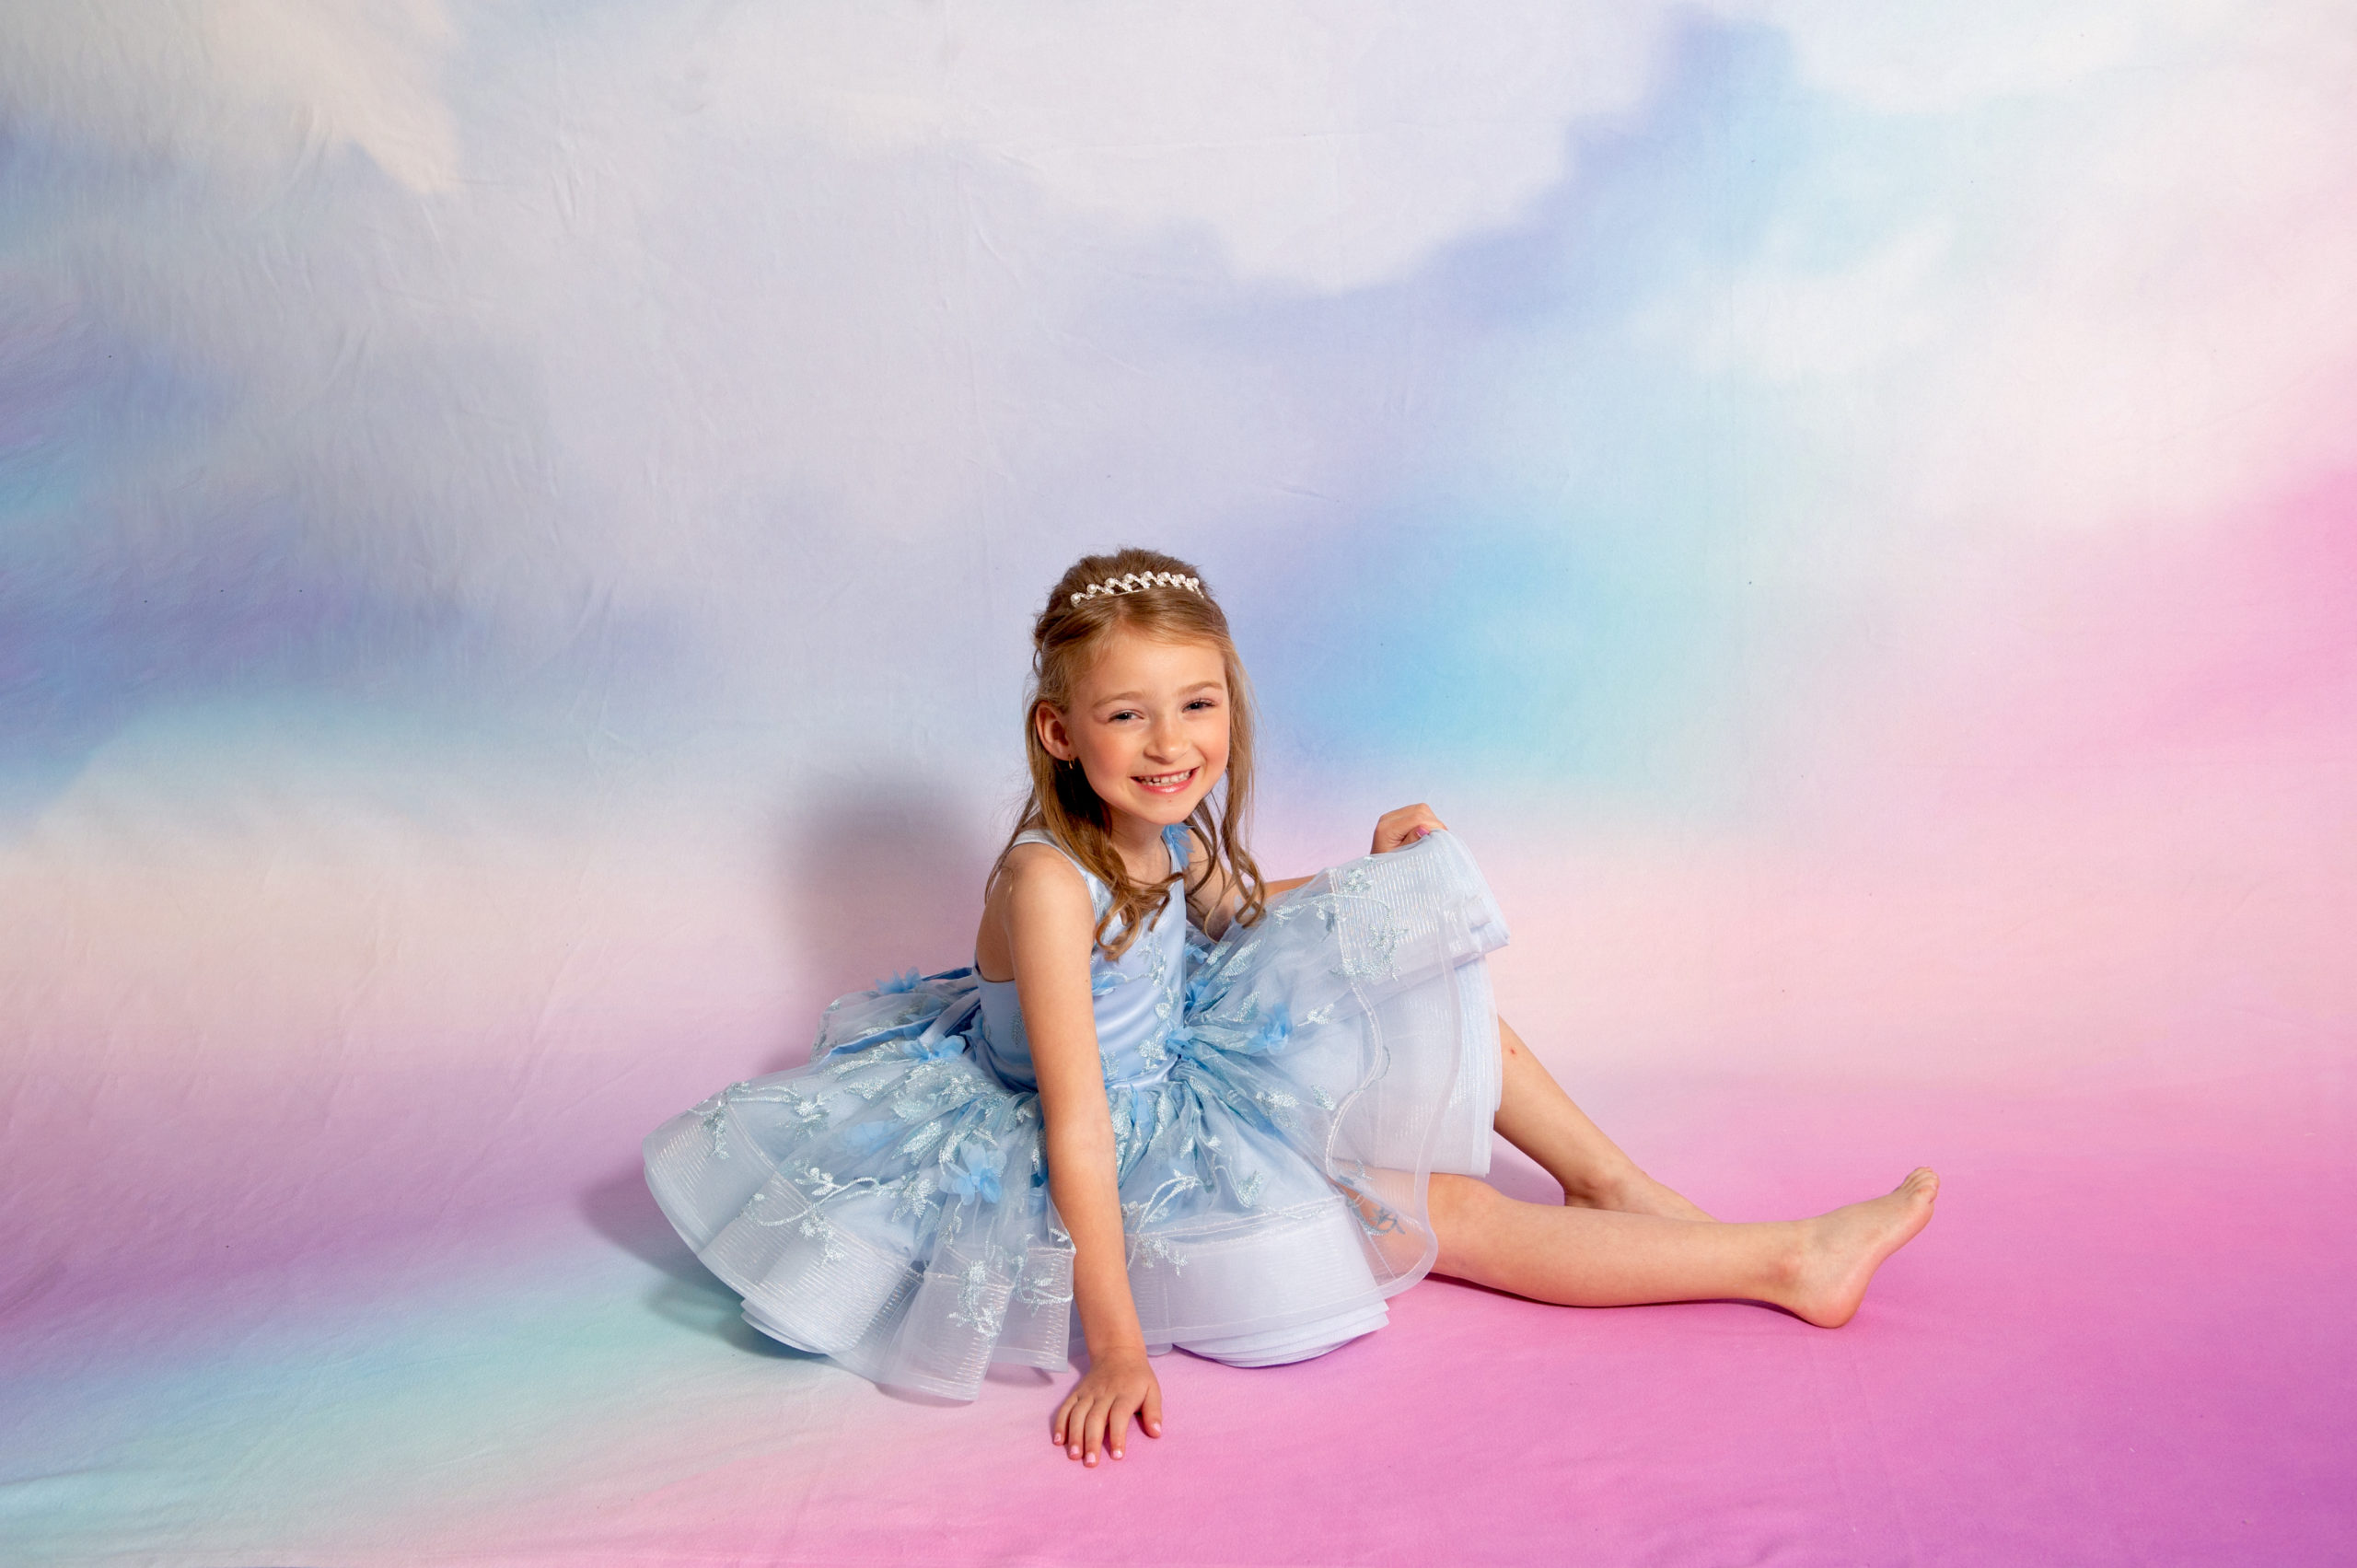 Dream Dress Experience brings the biggest smiles to your daughter's face.